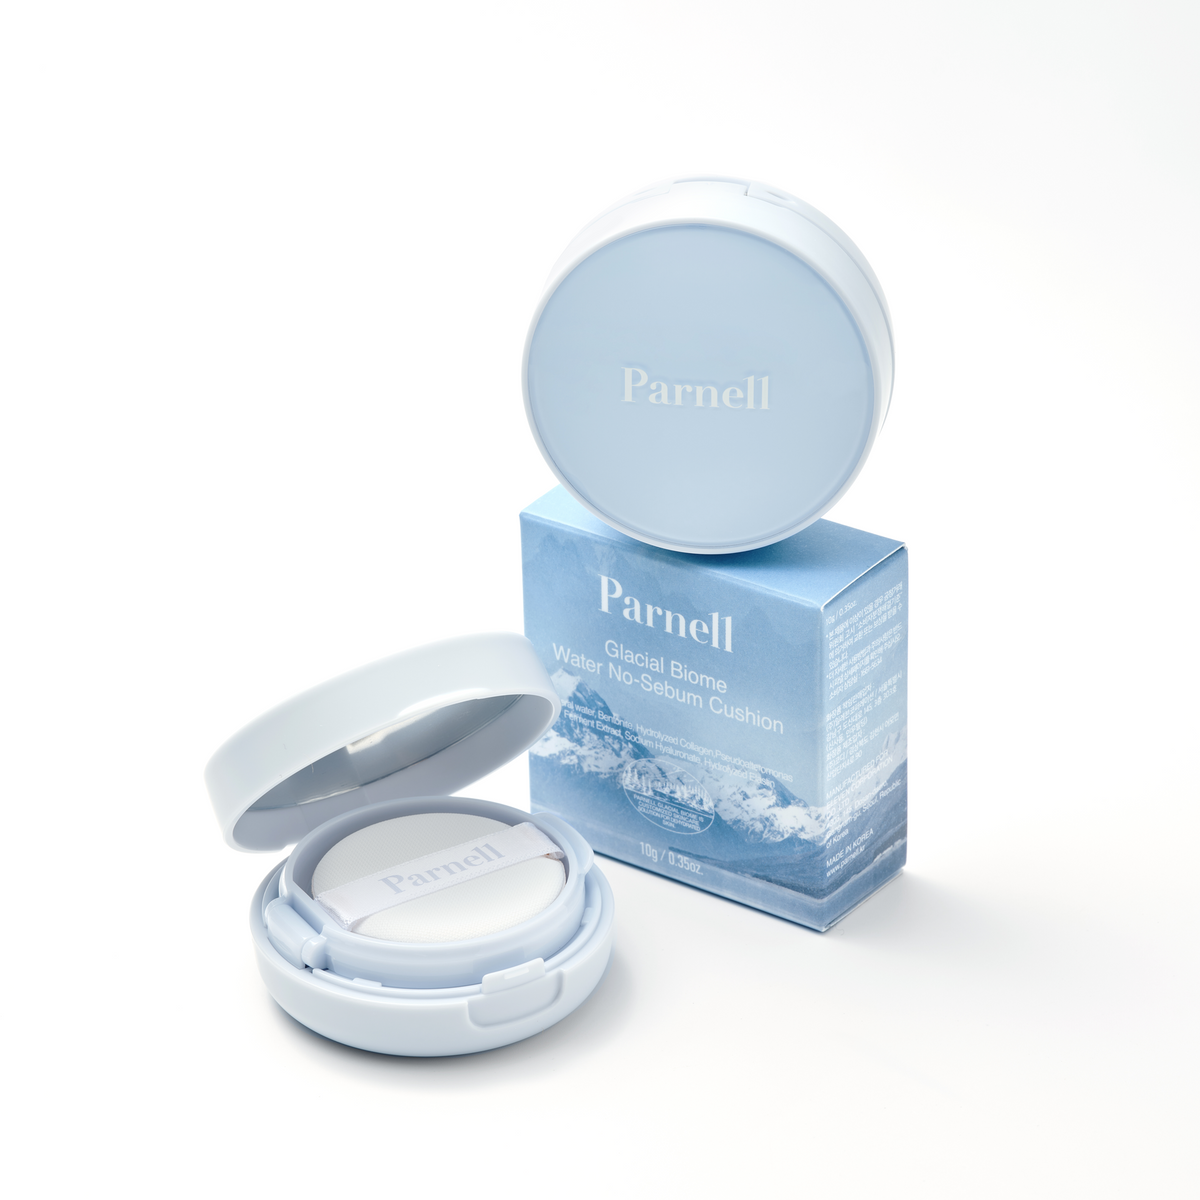 Parnell Cushion Glacial Biome Water No-Sebum for oily skin